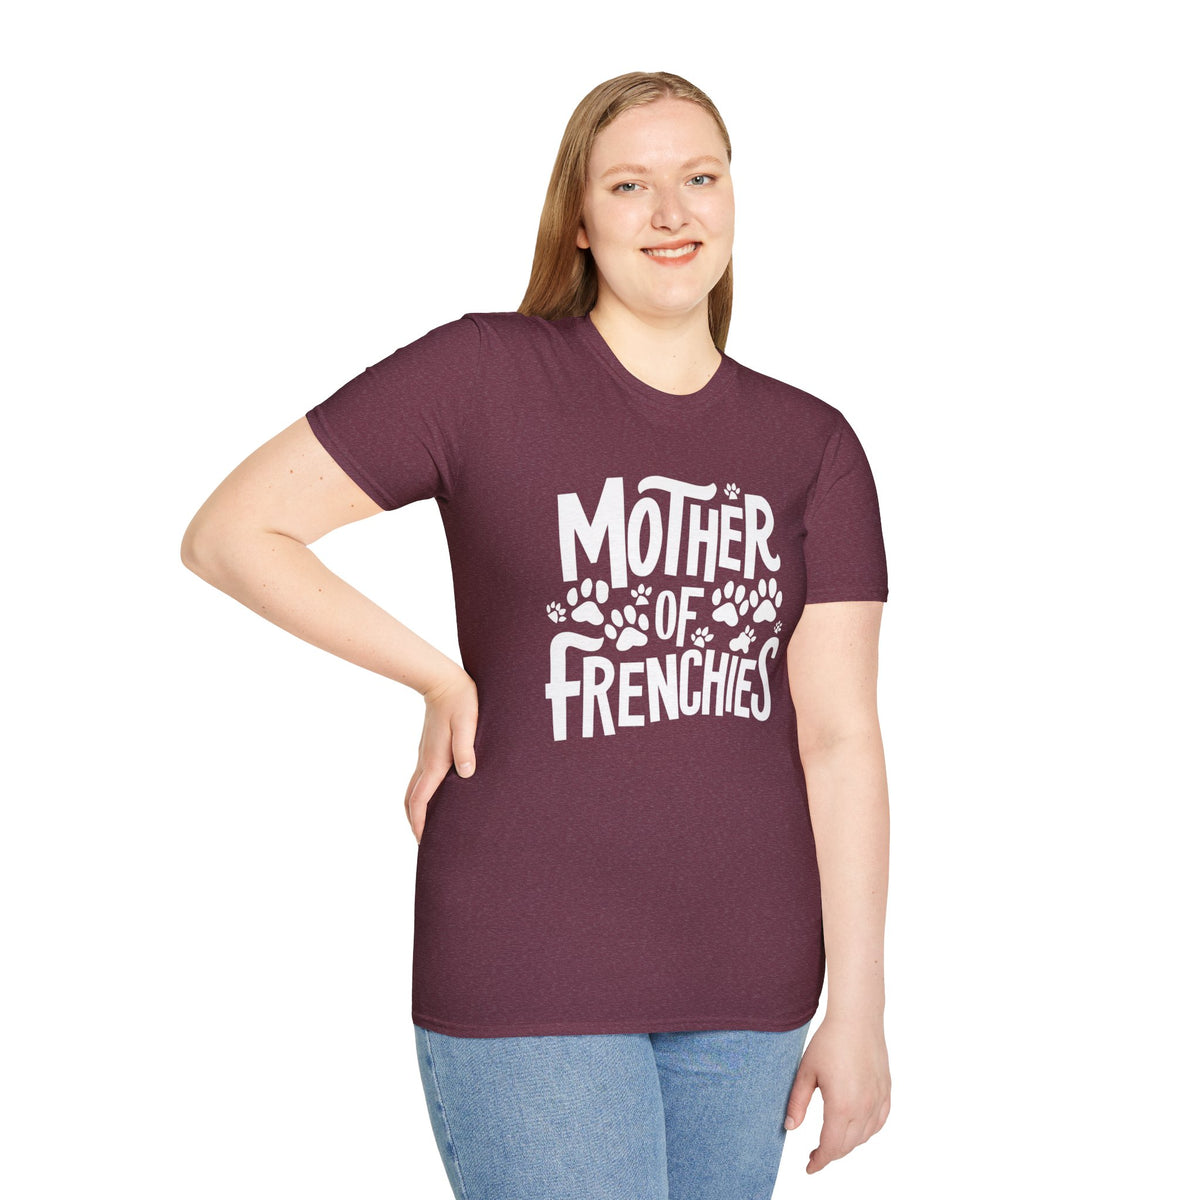 Mother of Frenchie - FRENCH BULLDOG T-SHIRT